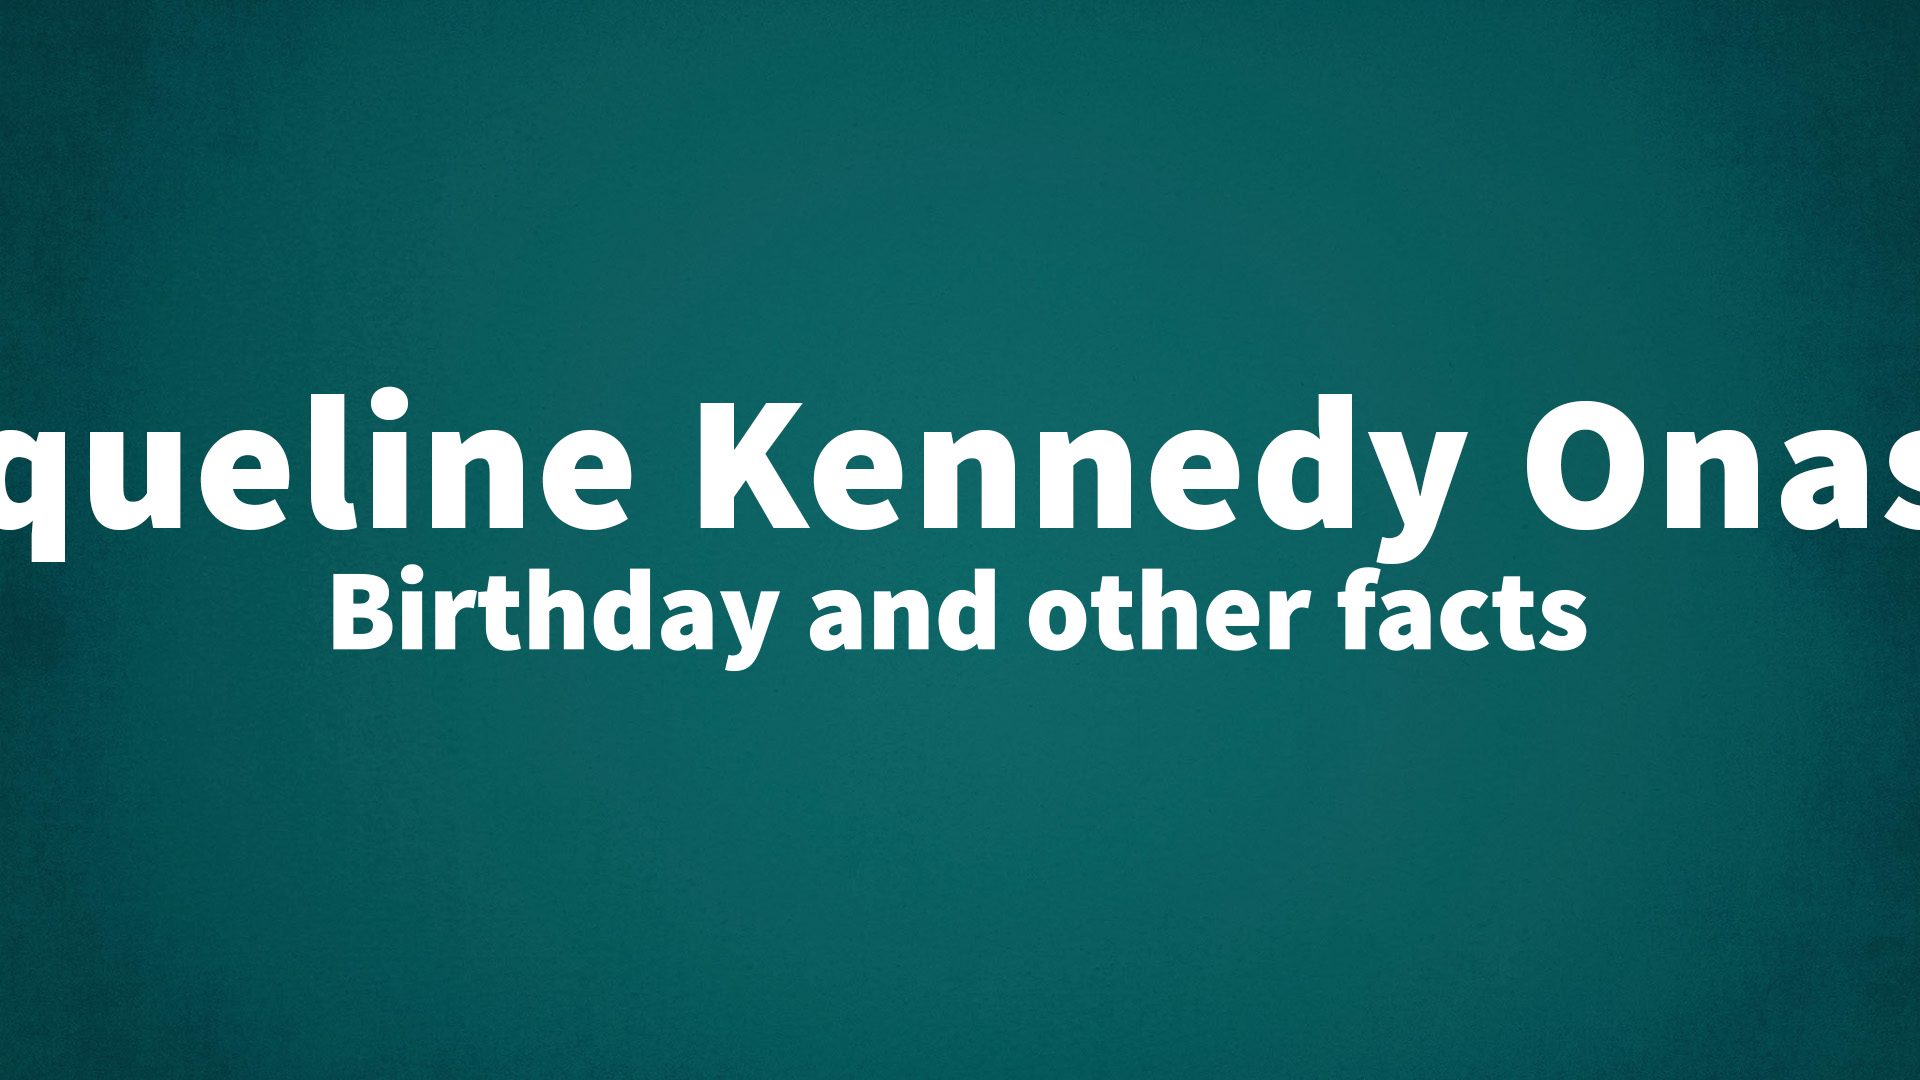 title image for Jacqueline Kennedy Onassis birthday